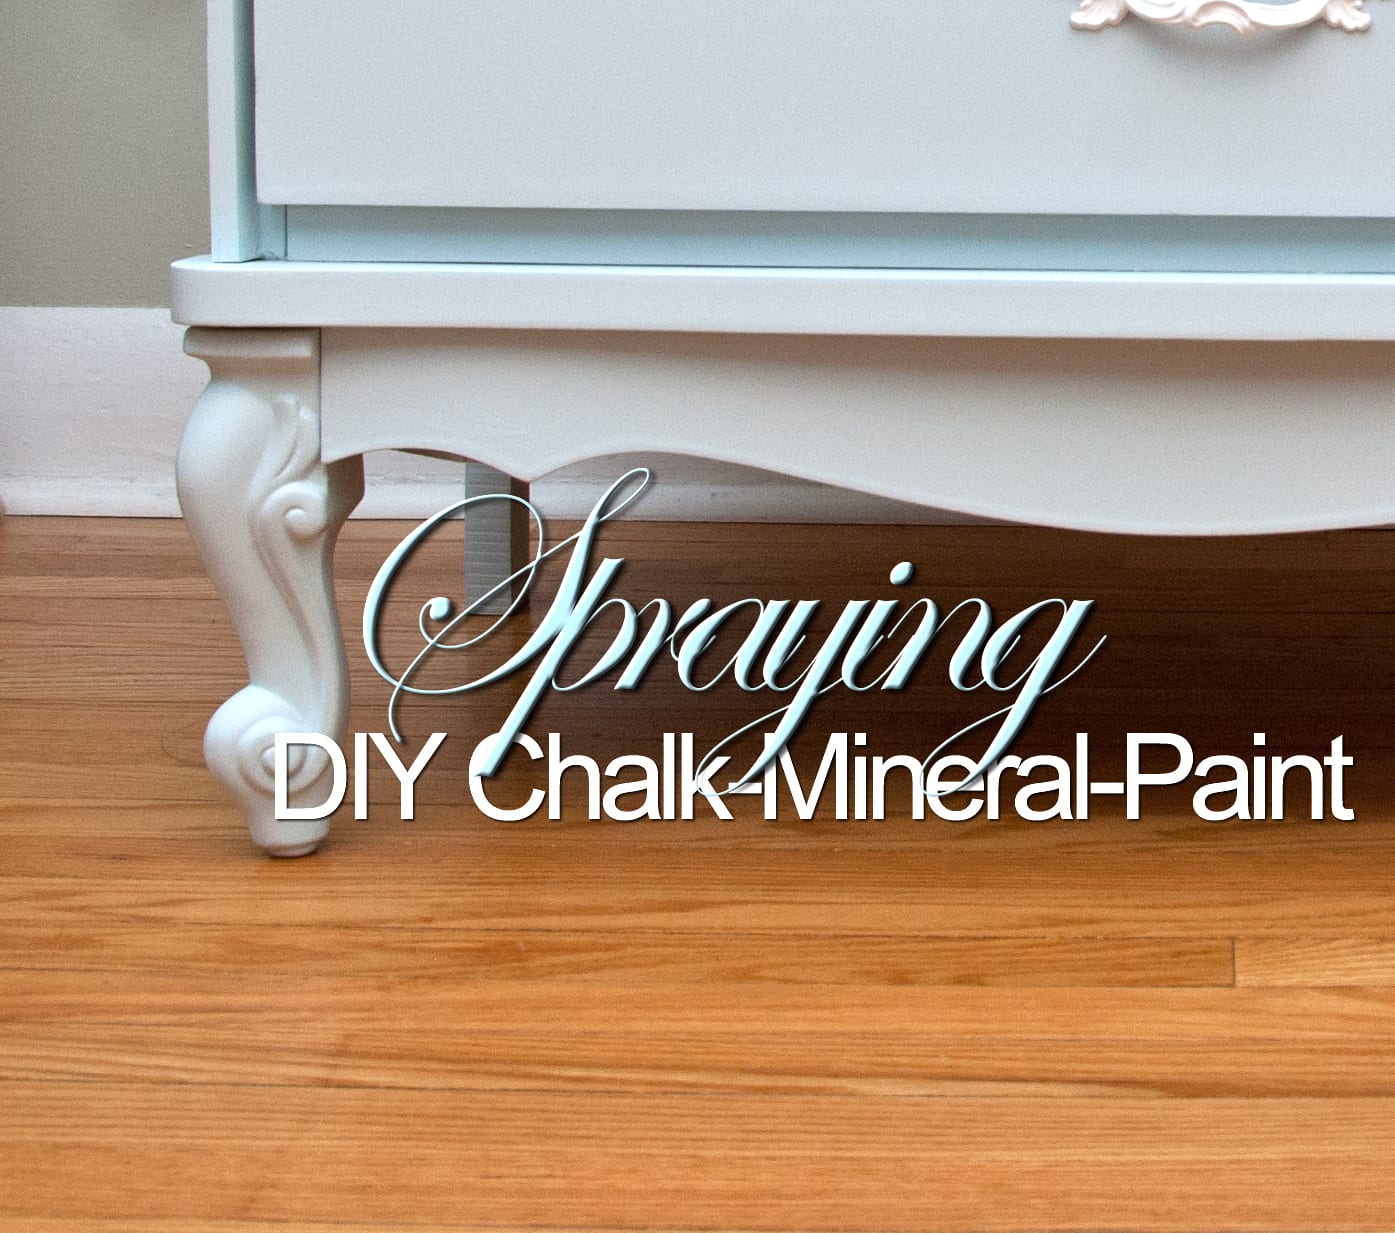 Spraying DIY Chalk-Mineral-Paint Finally Got Around To Doing It! -  Salvaged Inspirations